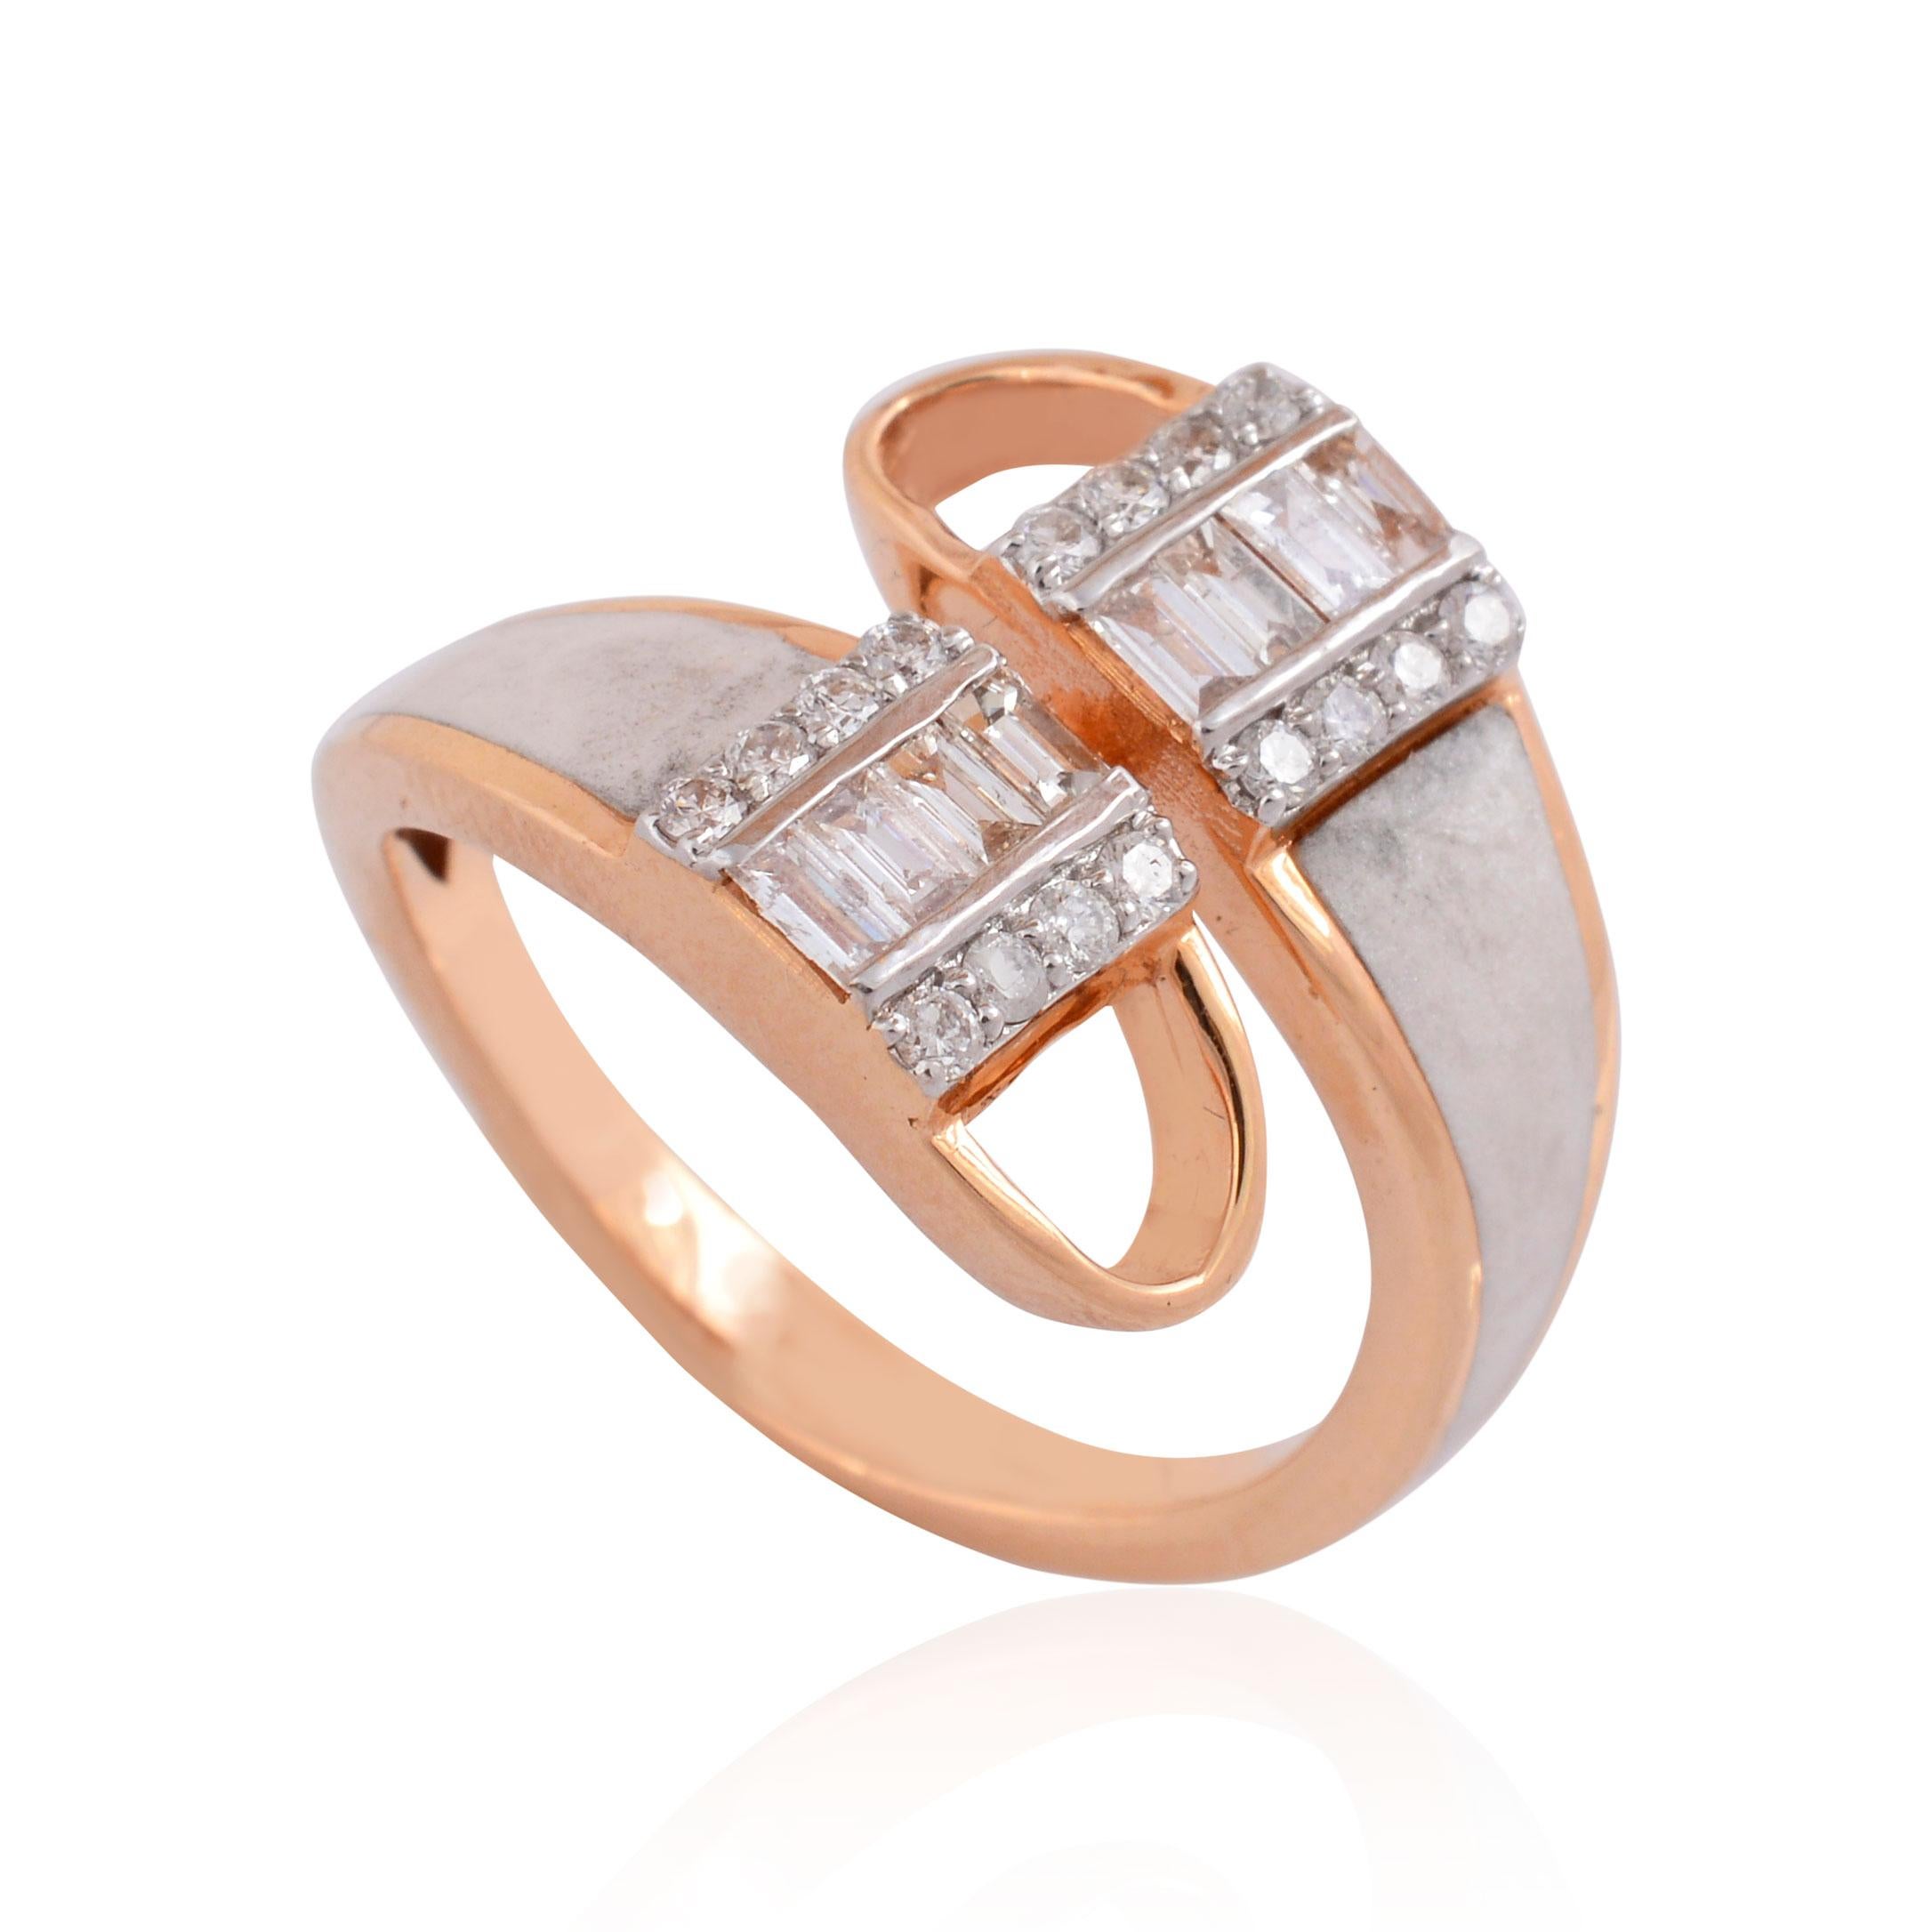 For Sale:  SI Clarity HI Color Baguette Diamond Enamel Wrap Cuff Ring 18k Rose Gold Jewelry 7